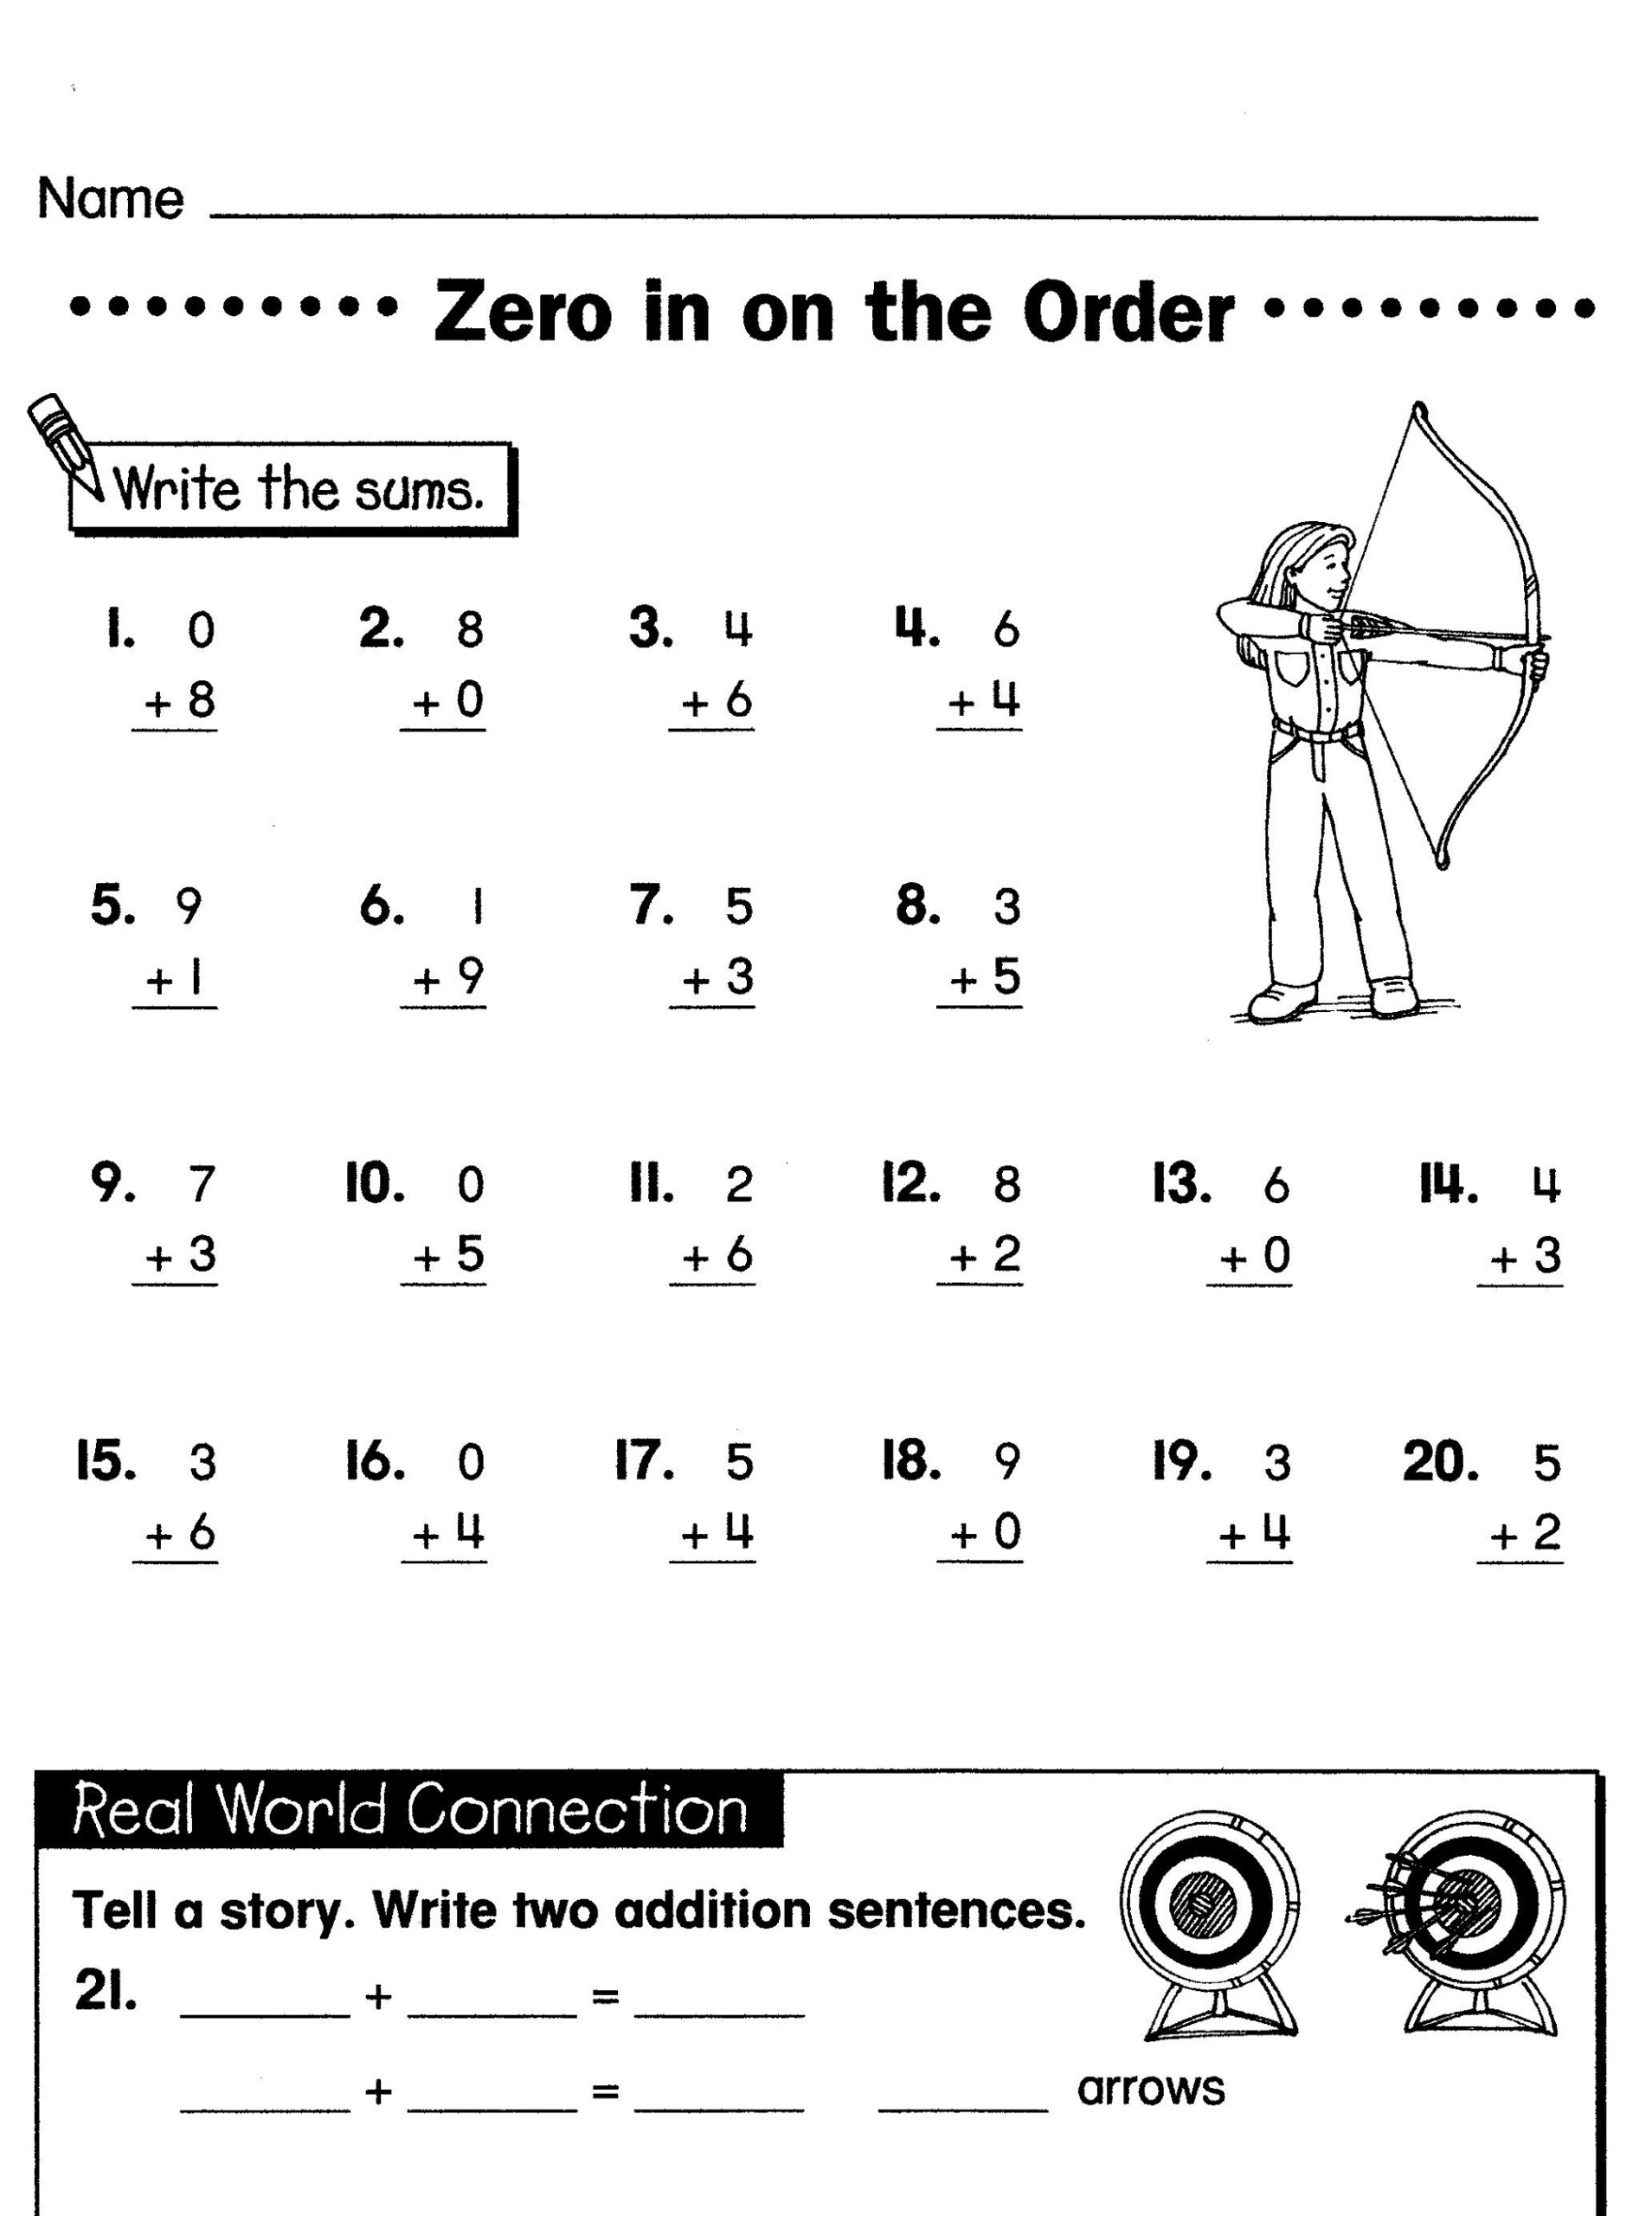 K12 Learning Worksheets Patriotnewswatch Page Multiplication within Multiplication Worksheets K12